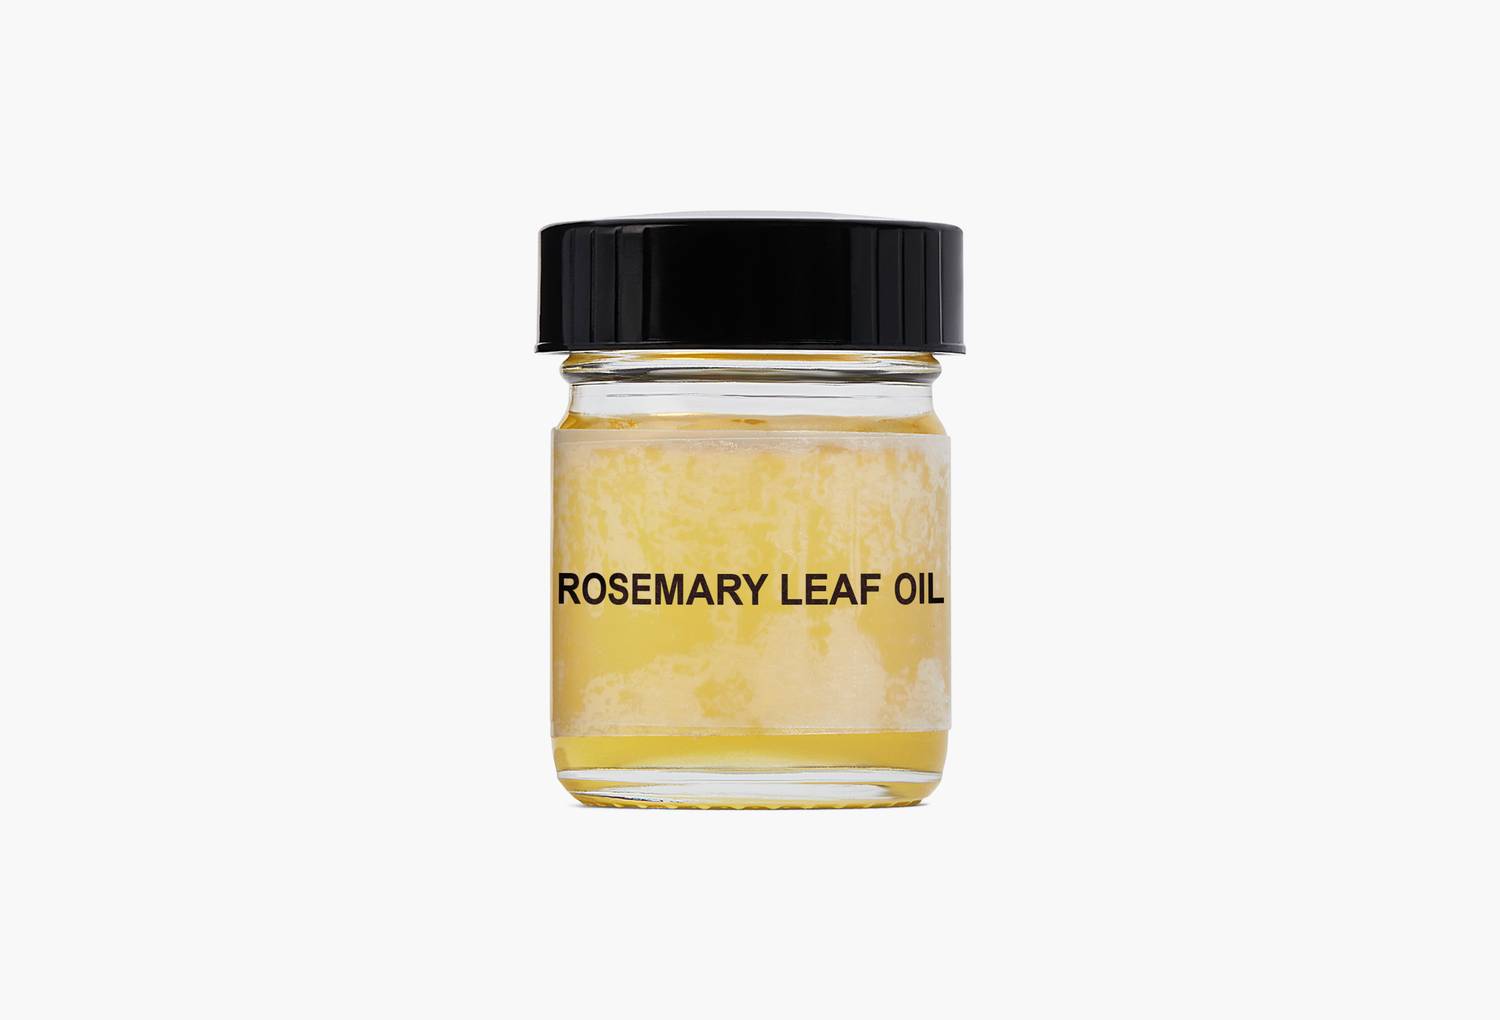 Rosemary Leaf Oil in natural form